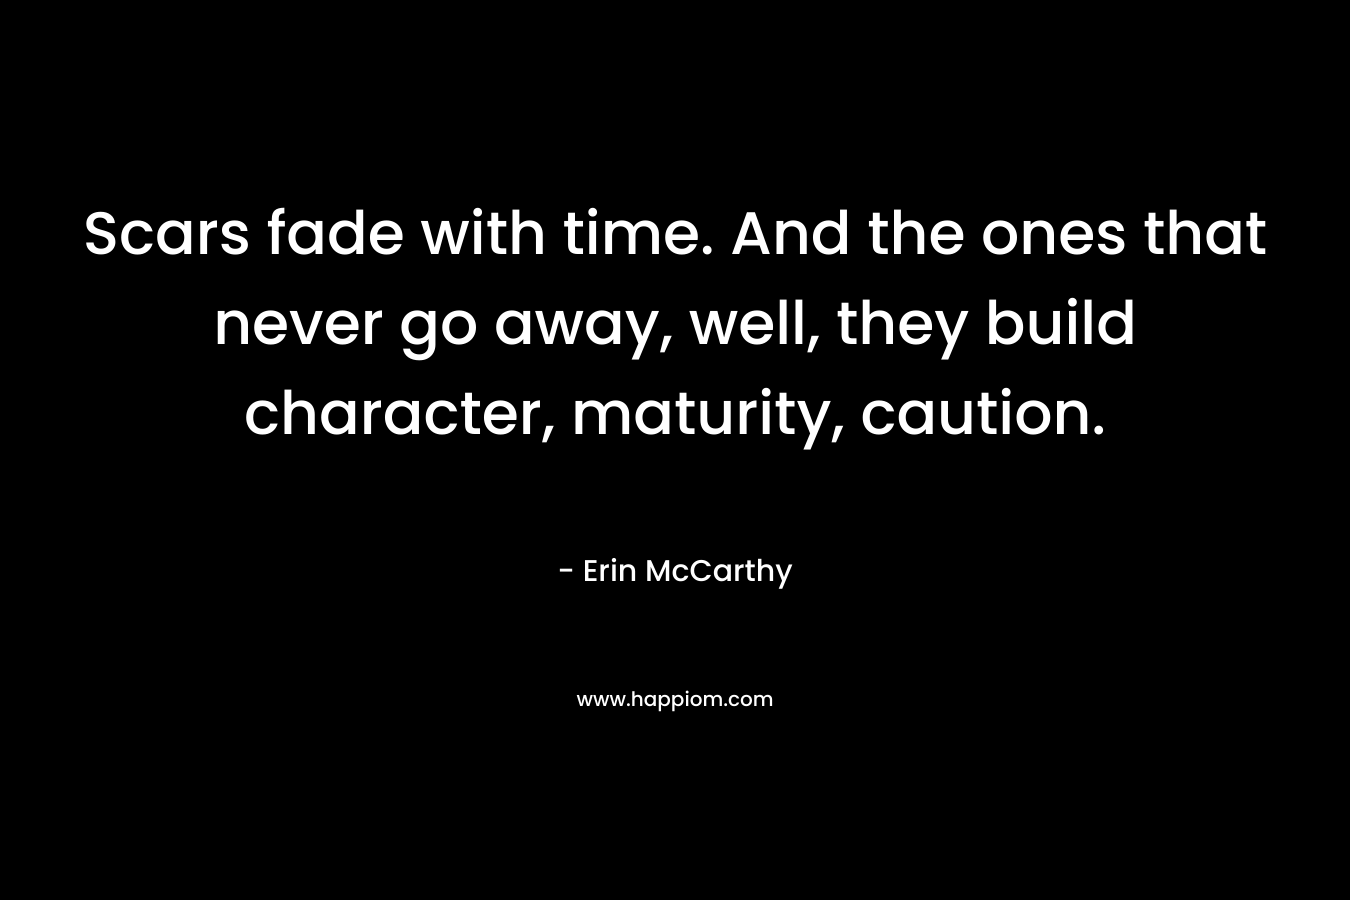 Scars fade with time. And the ones that never go away, well, they build character, maturity, caution. – Erin McCarthy